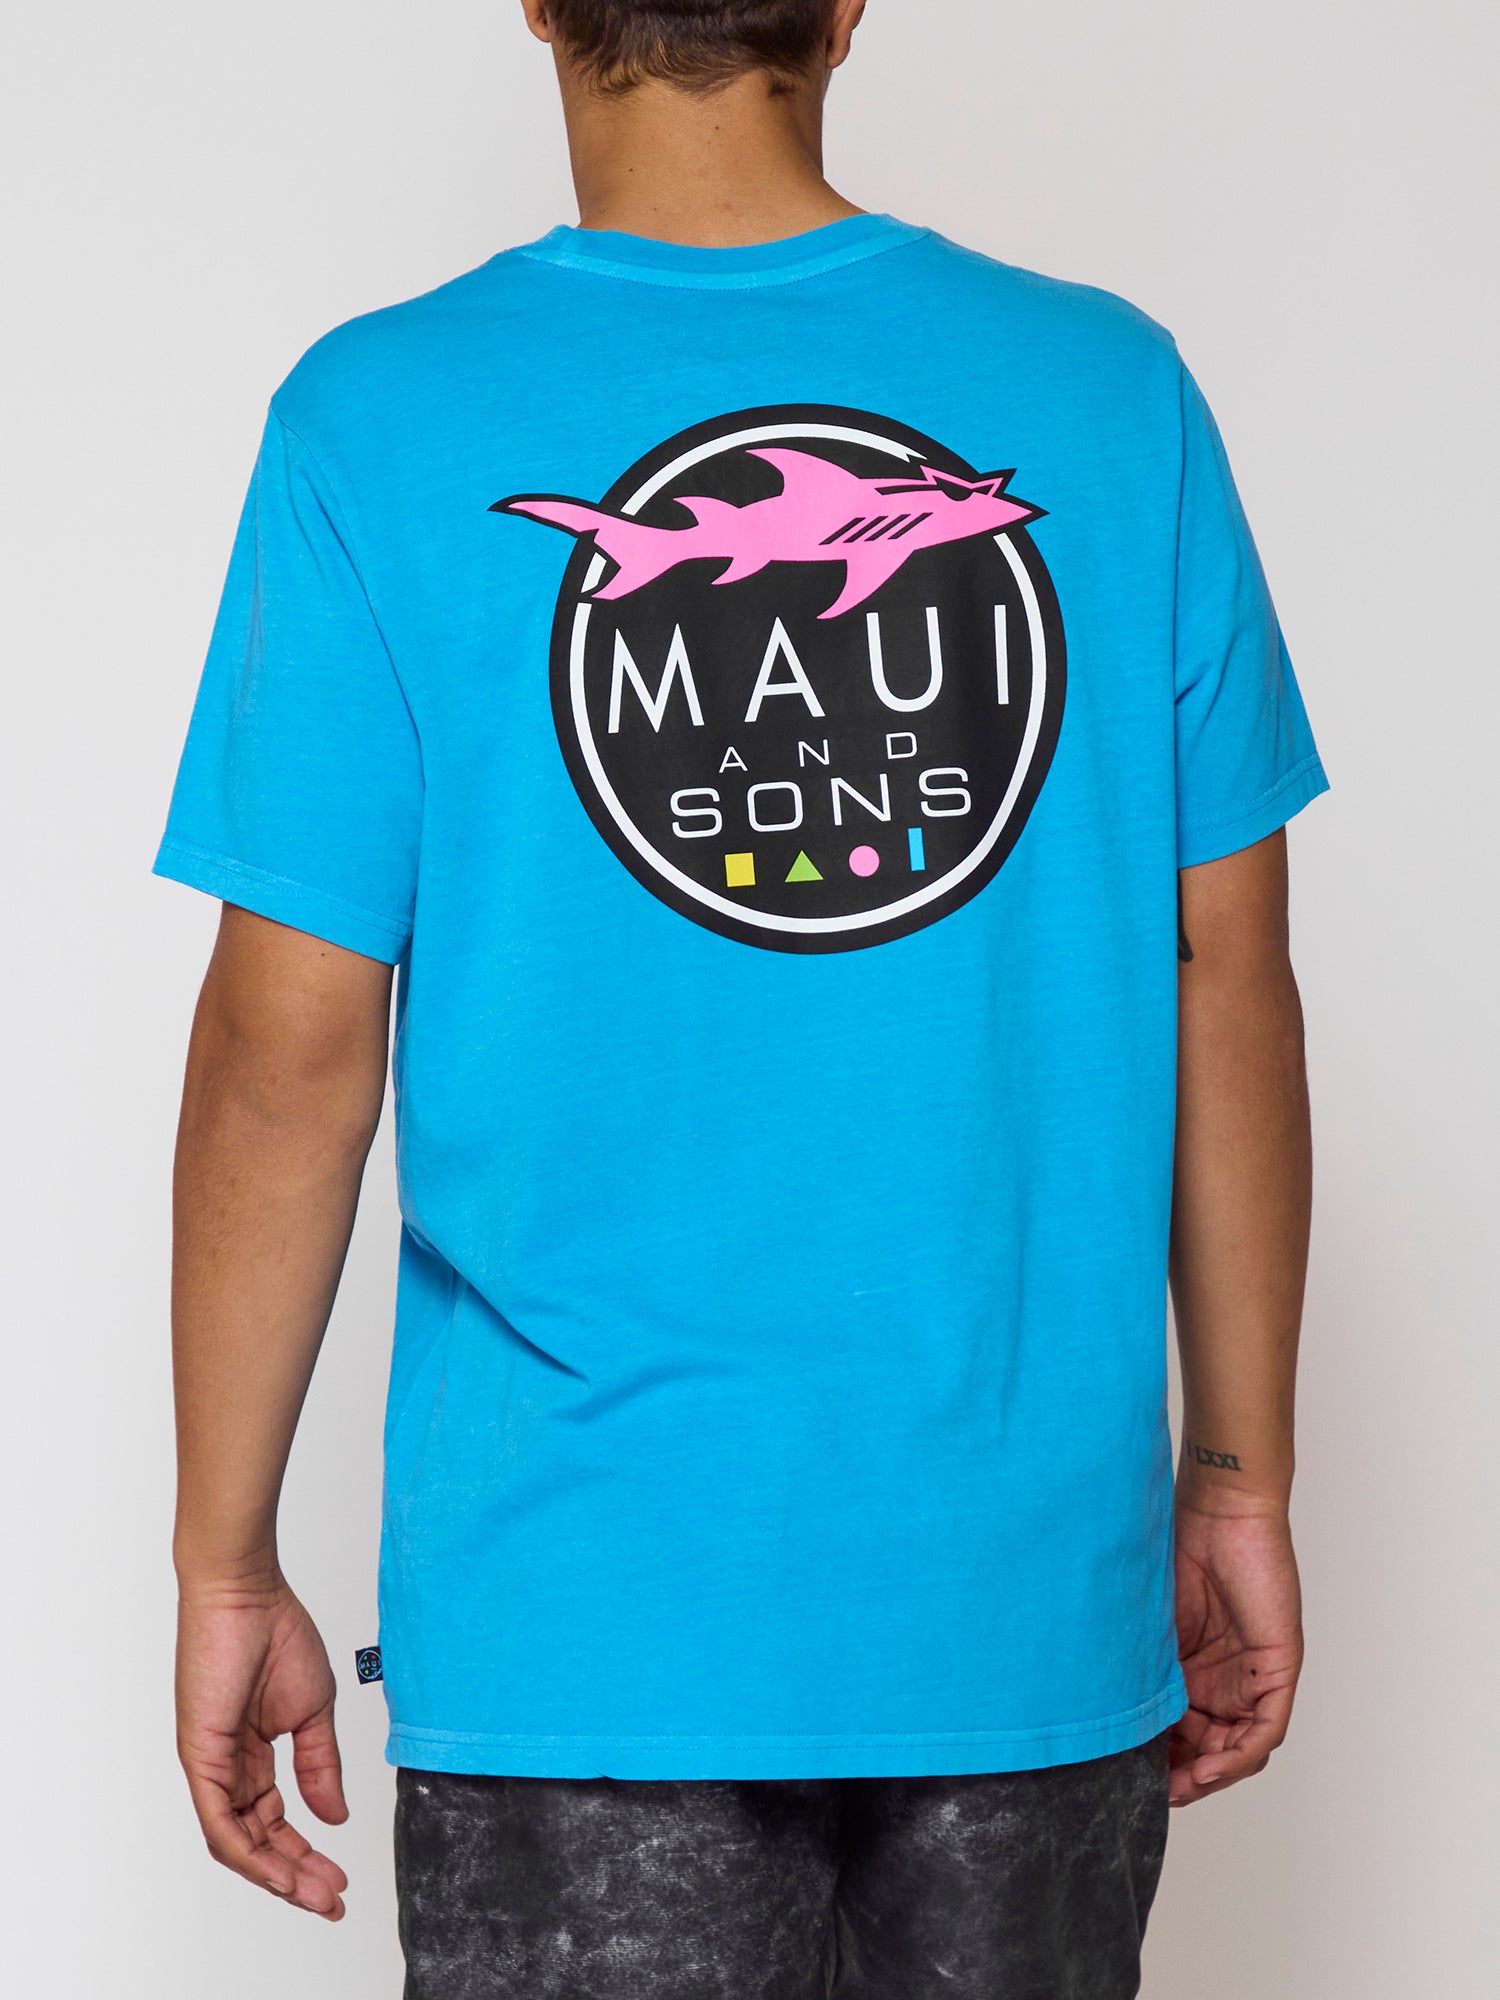 Unisex Styles | Maui and Sons